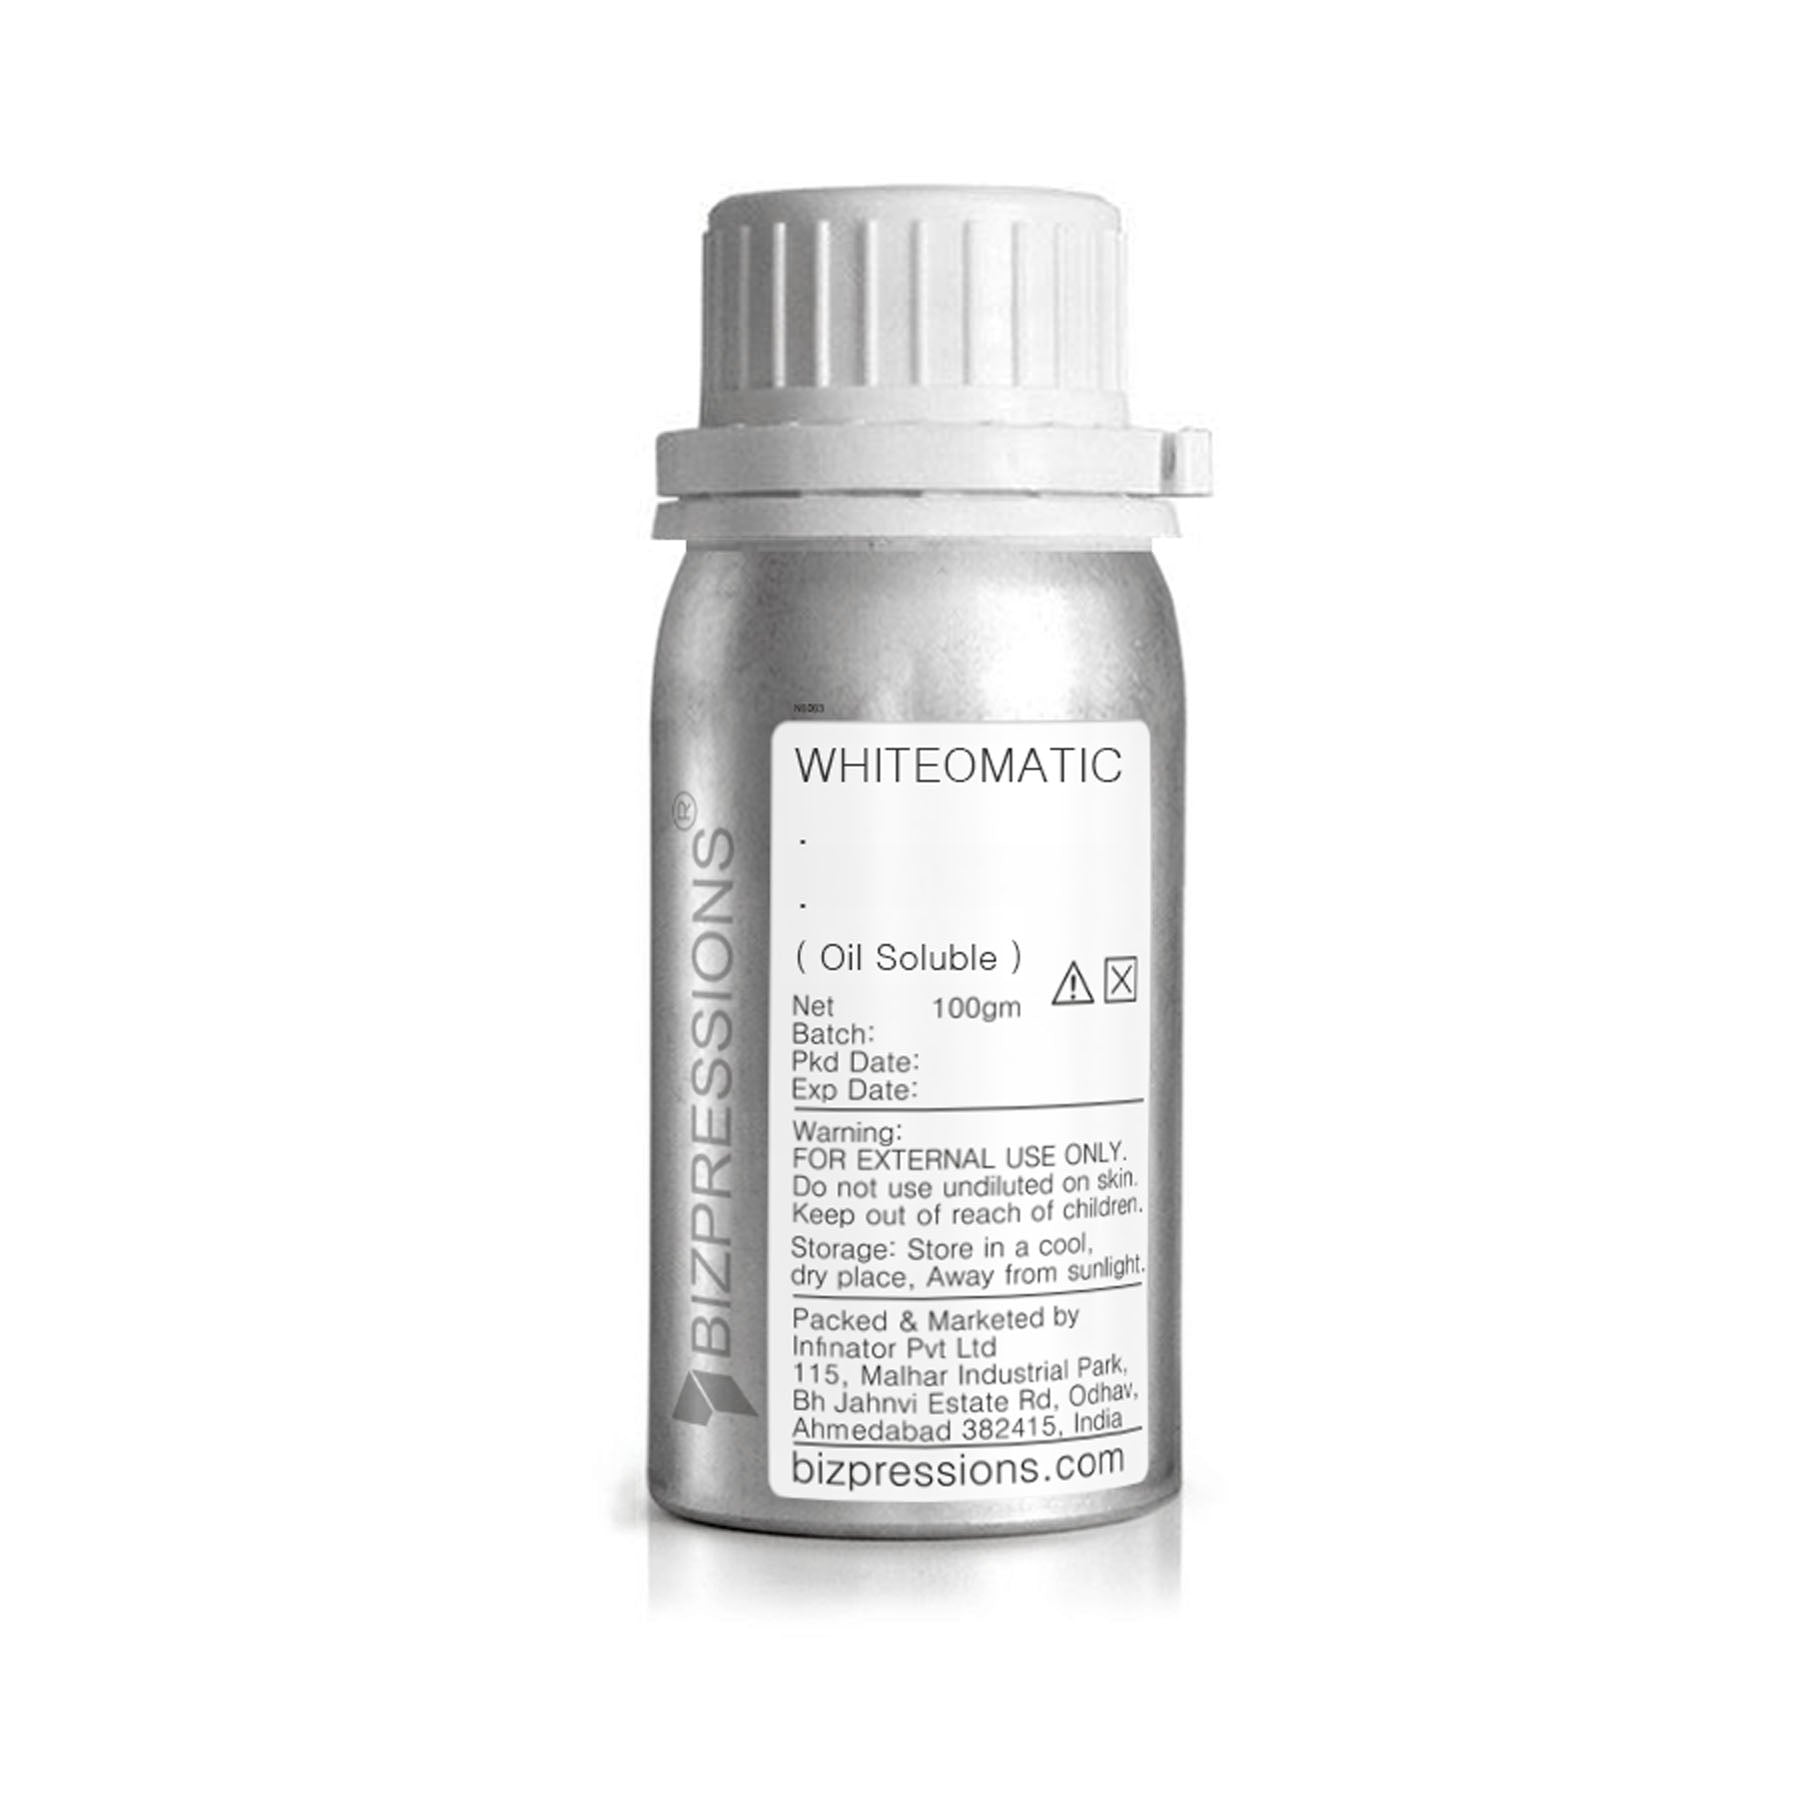 WHITEOMATIC - Fragrance ( Oil Soluble ) - 100 gm